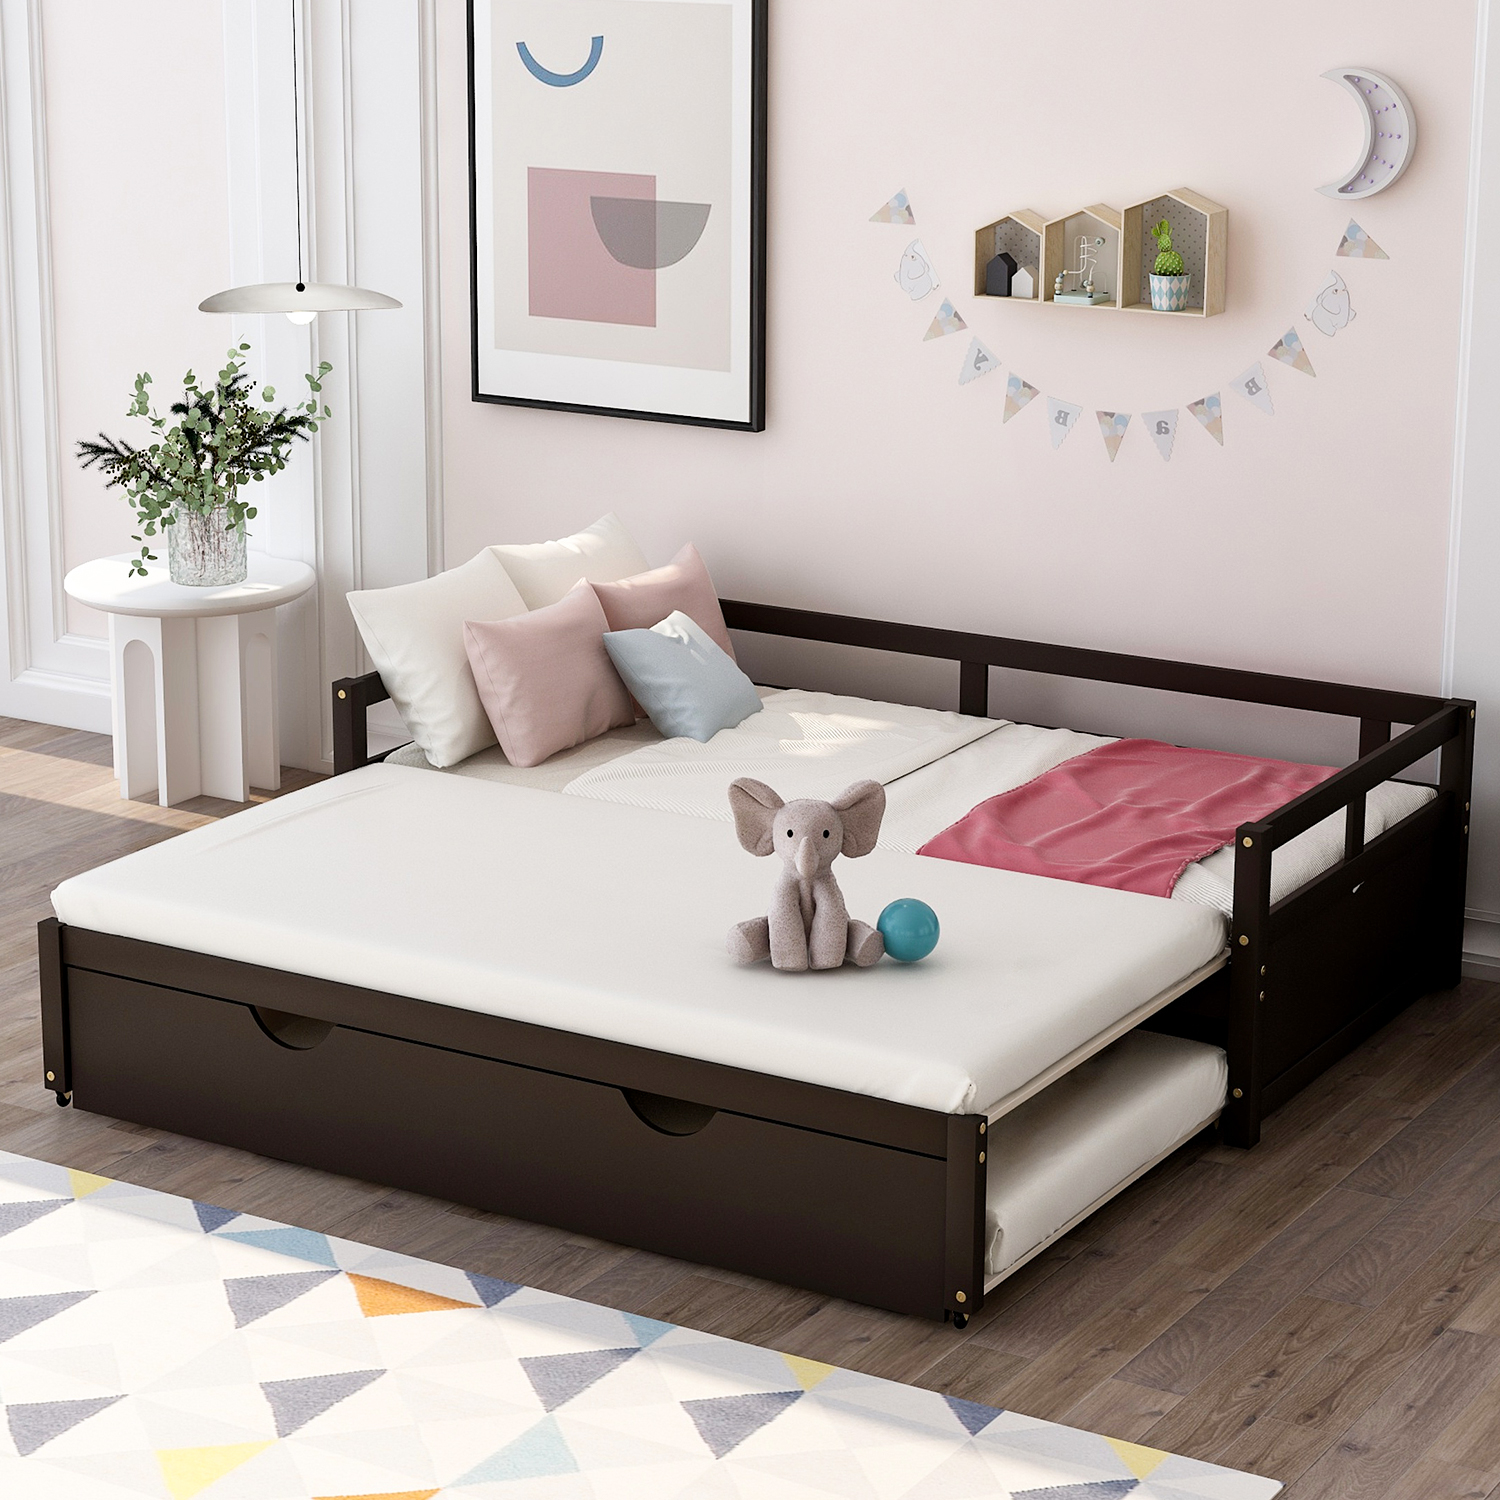 Extending Daybed with Trundle,&nbsp;Wooden Daybed with Trundle, Espresso-Boyel Living